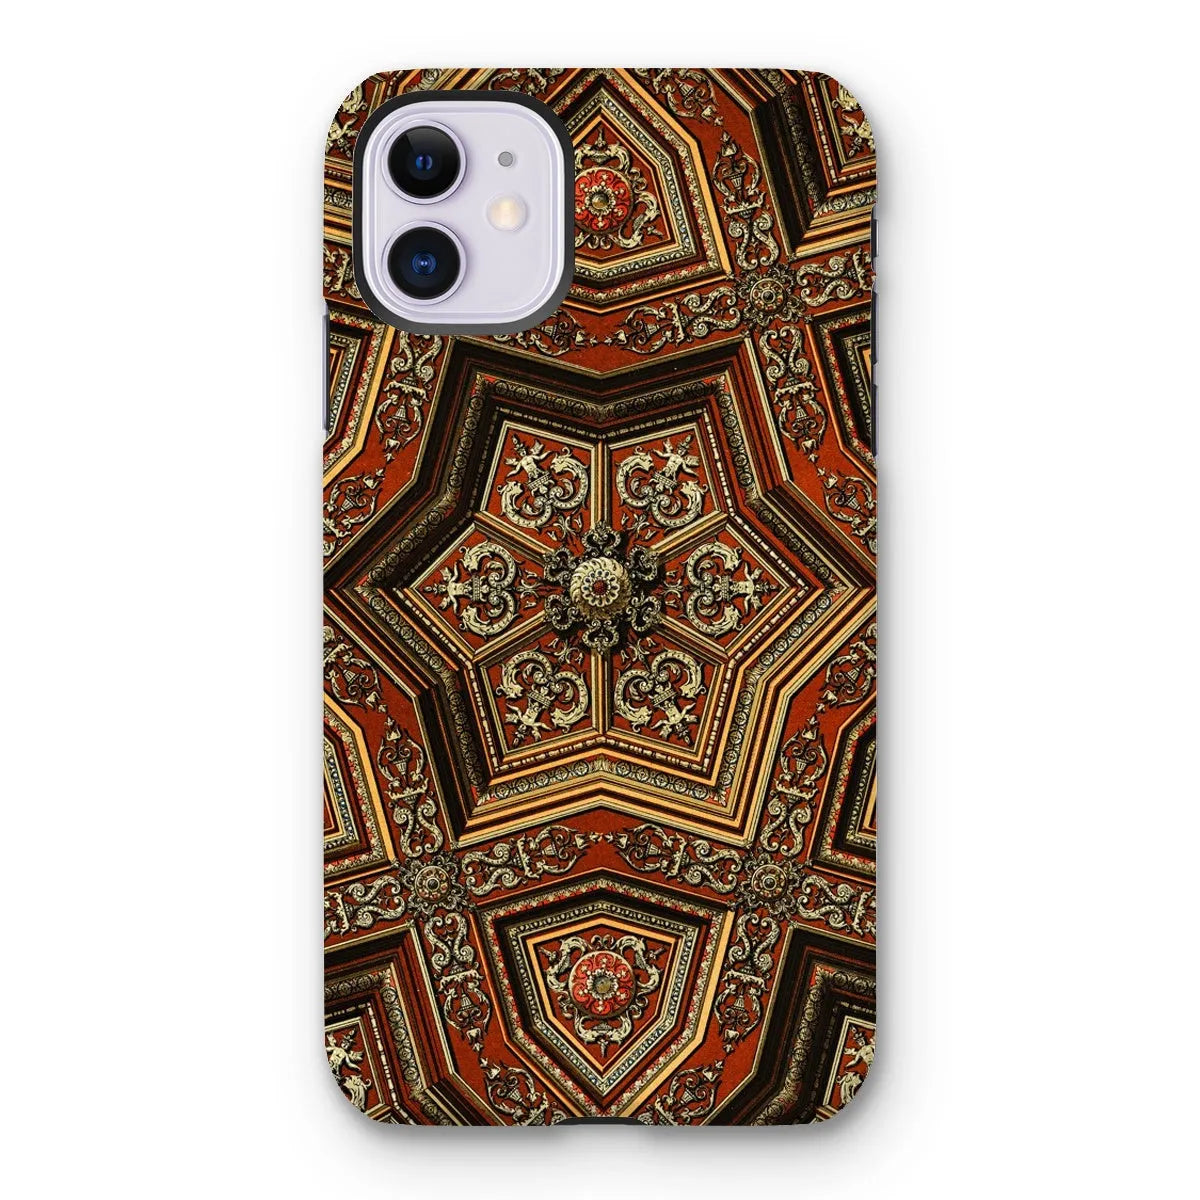 Renaissance Pattern By Auguste Racinet Tough Phone Case - Iphone 11 / Gloss - Mobile Phone Cases - Aesthetic Art